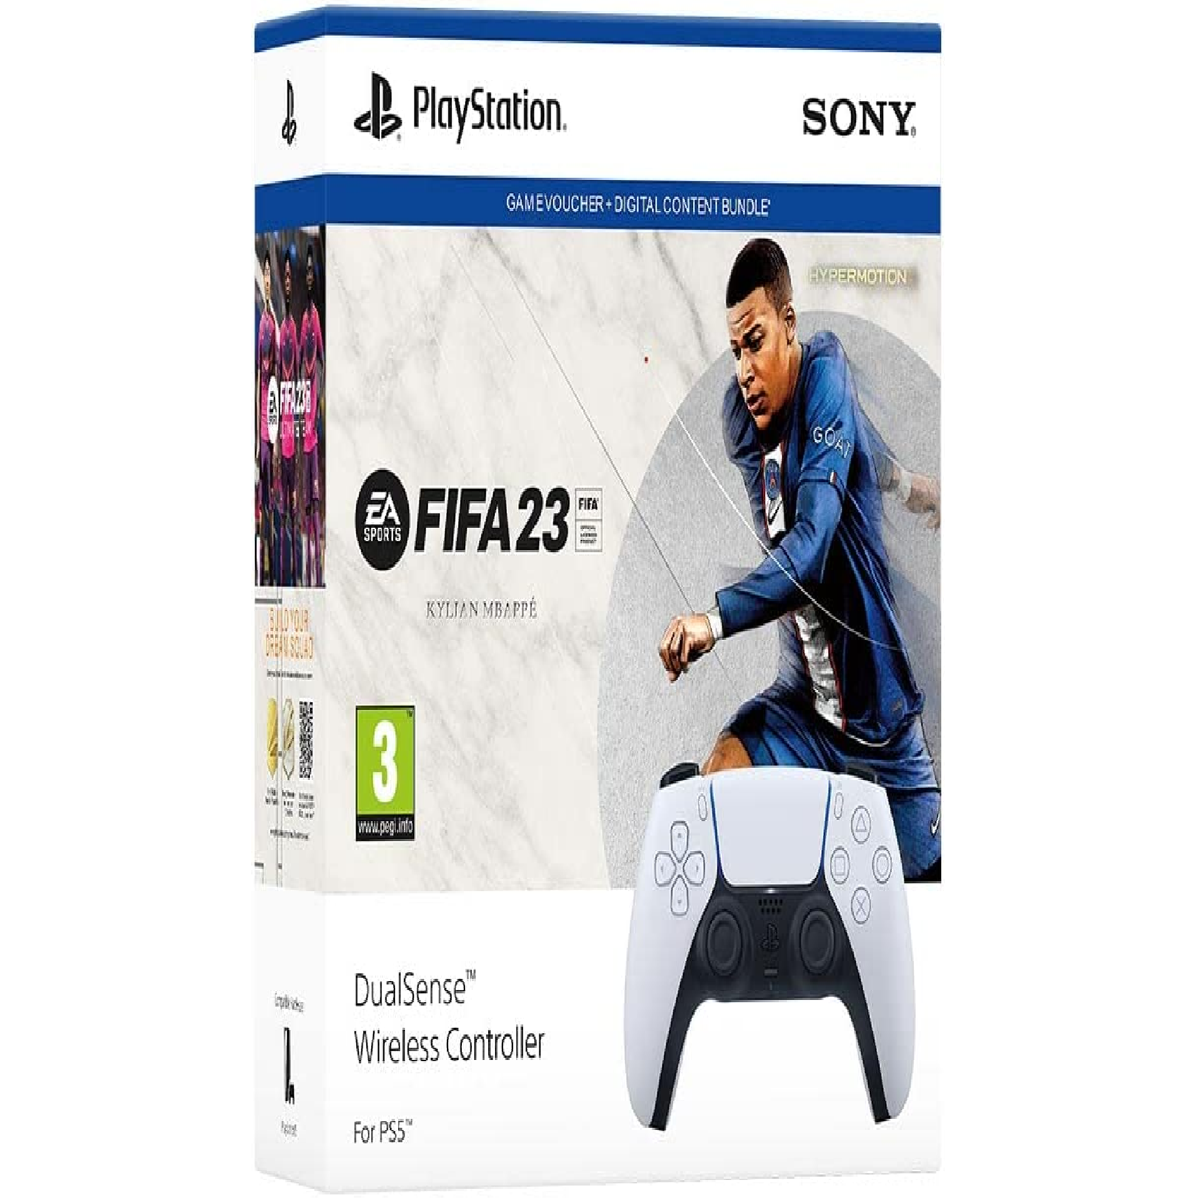 Incredible PS5 controller bundle deal plus Fifa 23 for just £69 is